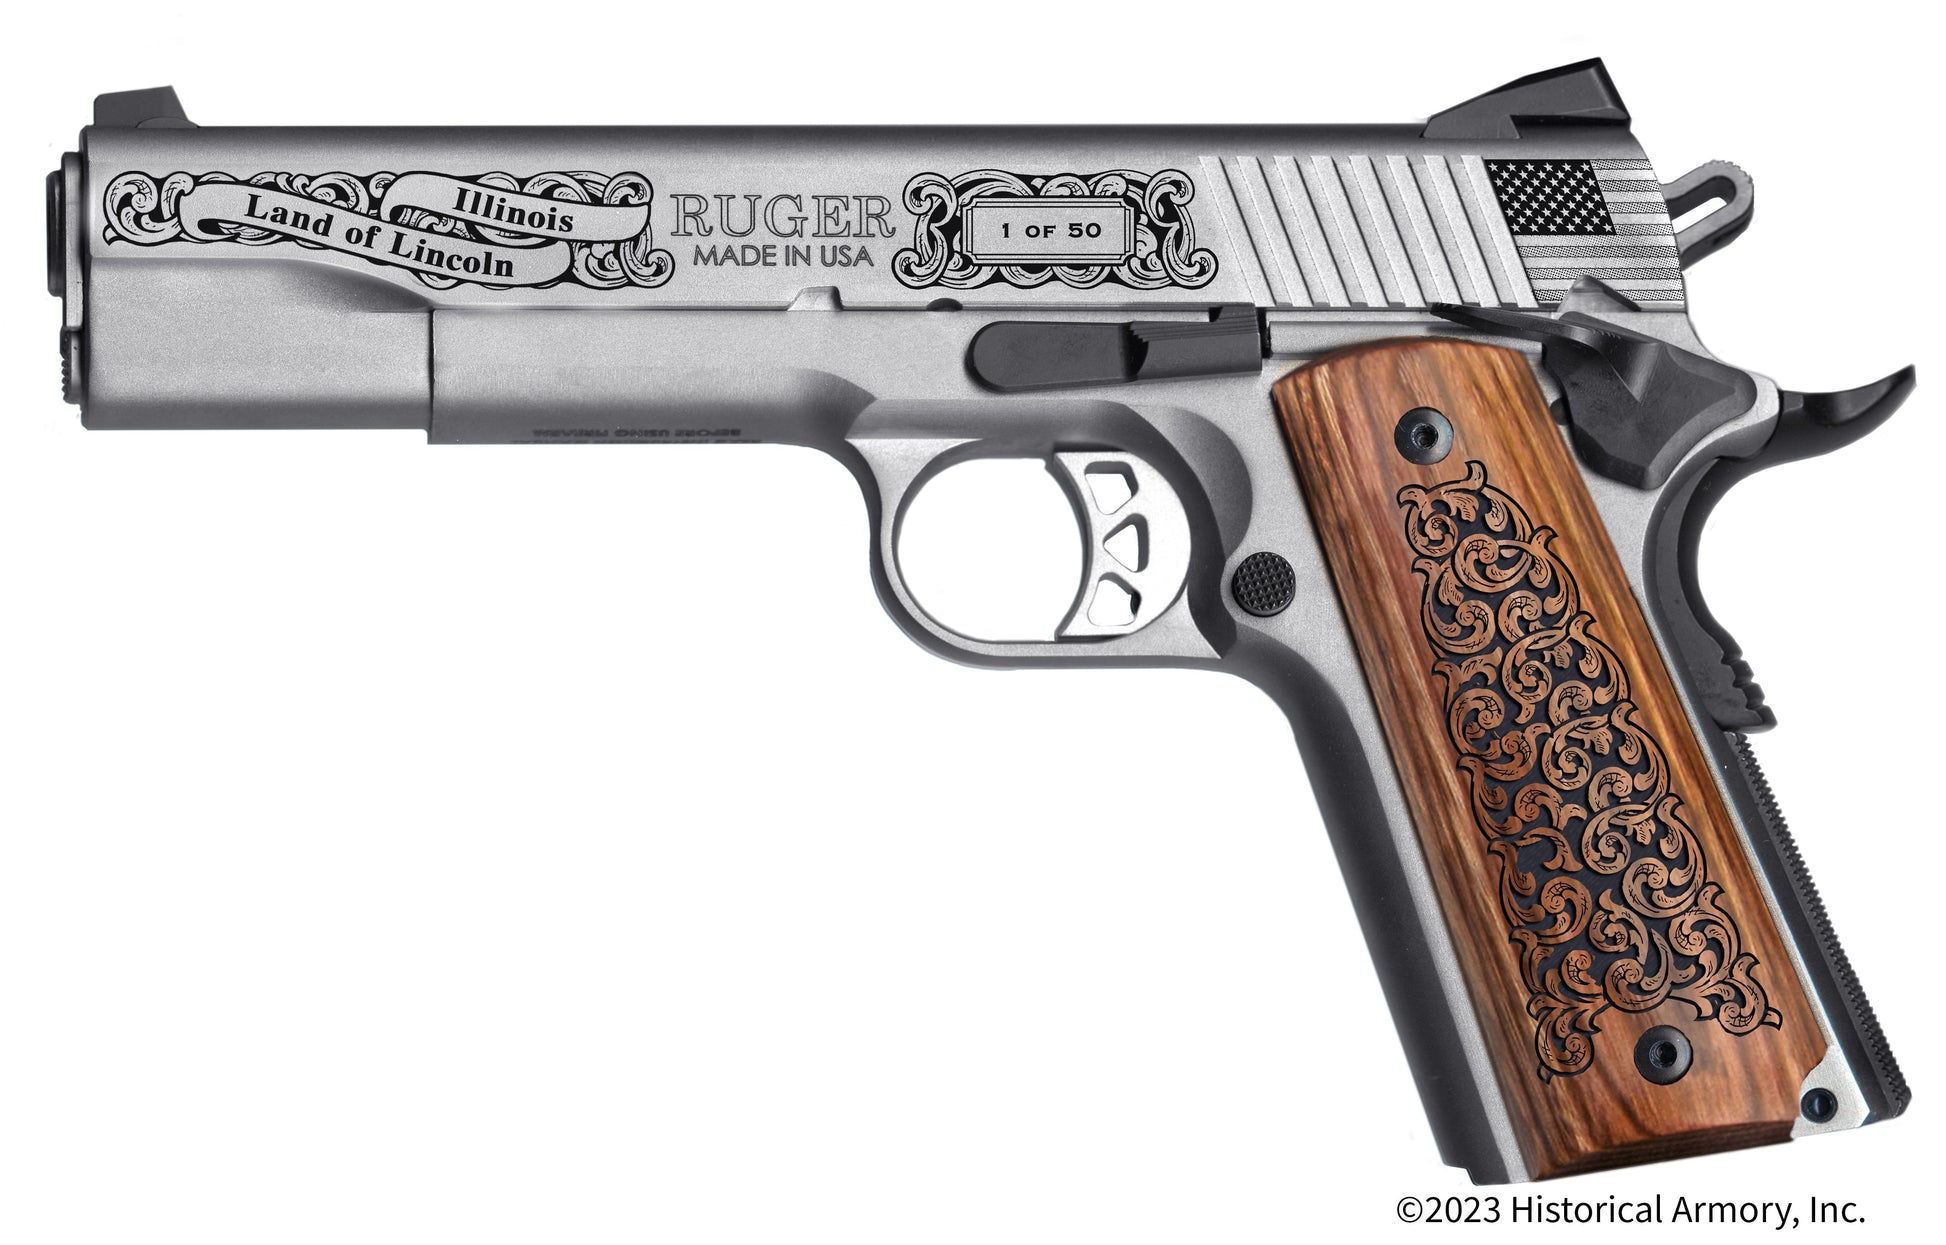 Clay County Illinois Engraved .45 Auto Ruger 1911